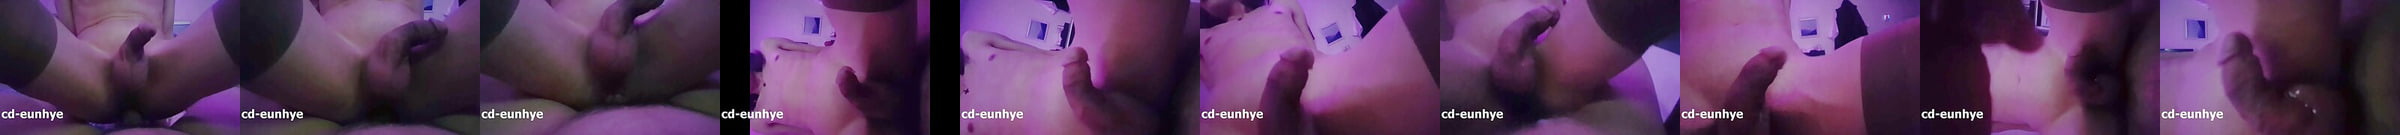 A Very Good Femboy Shemale Anal HD Porn Video 46 XHamster XHamster